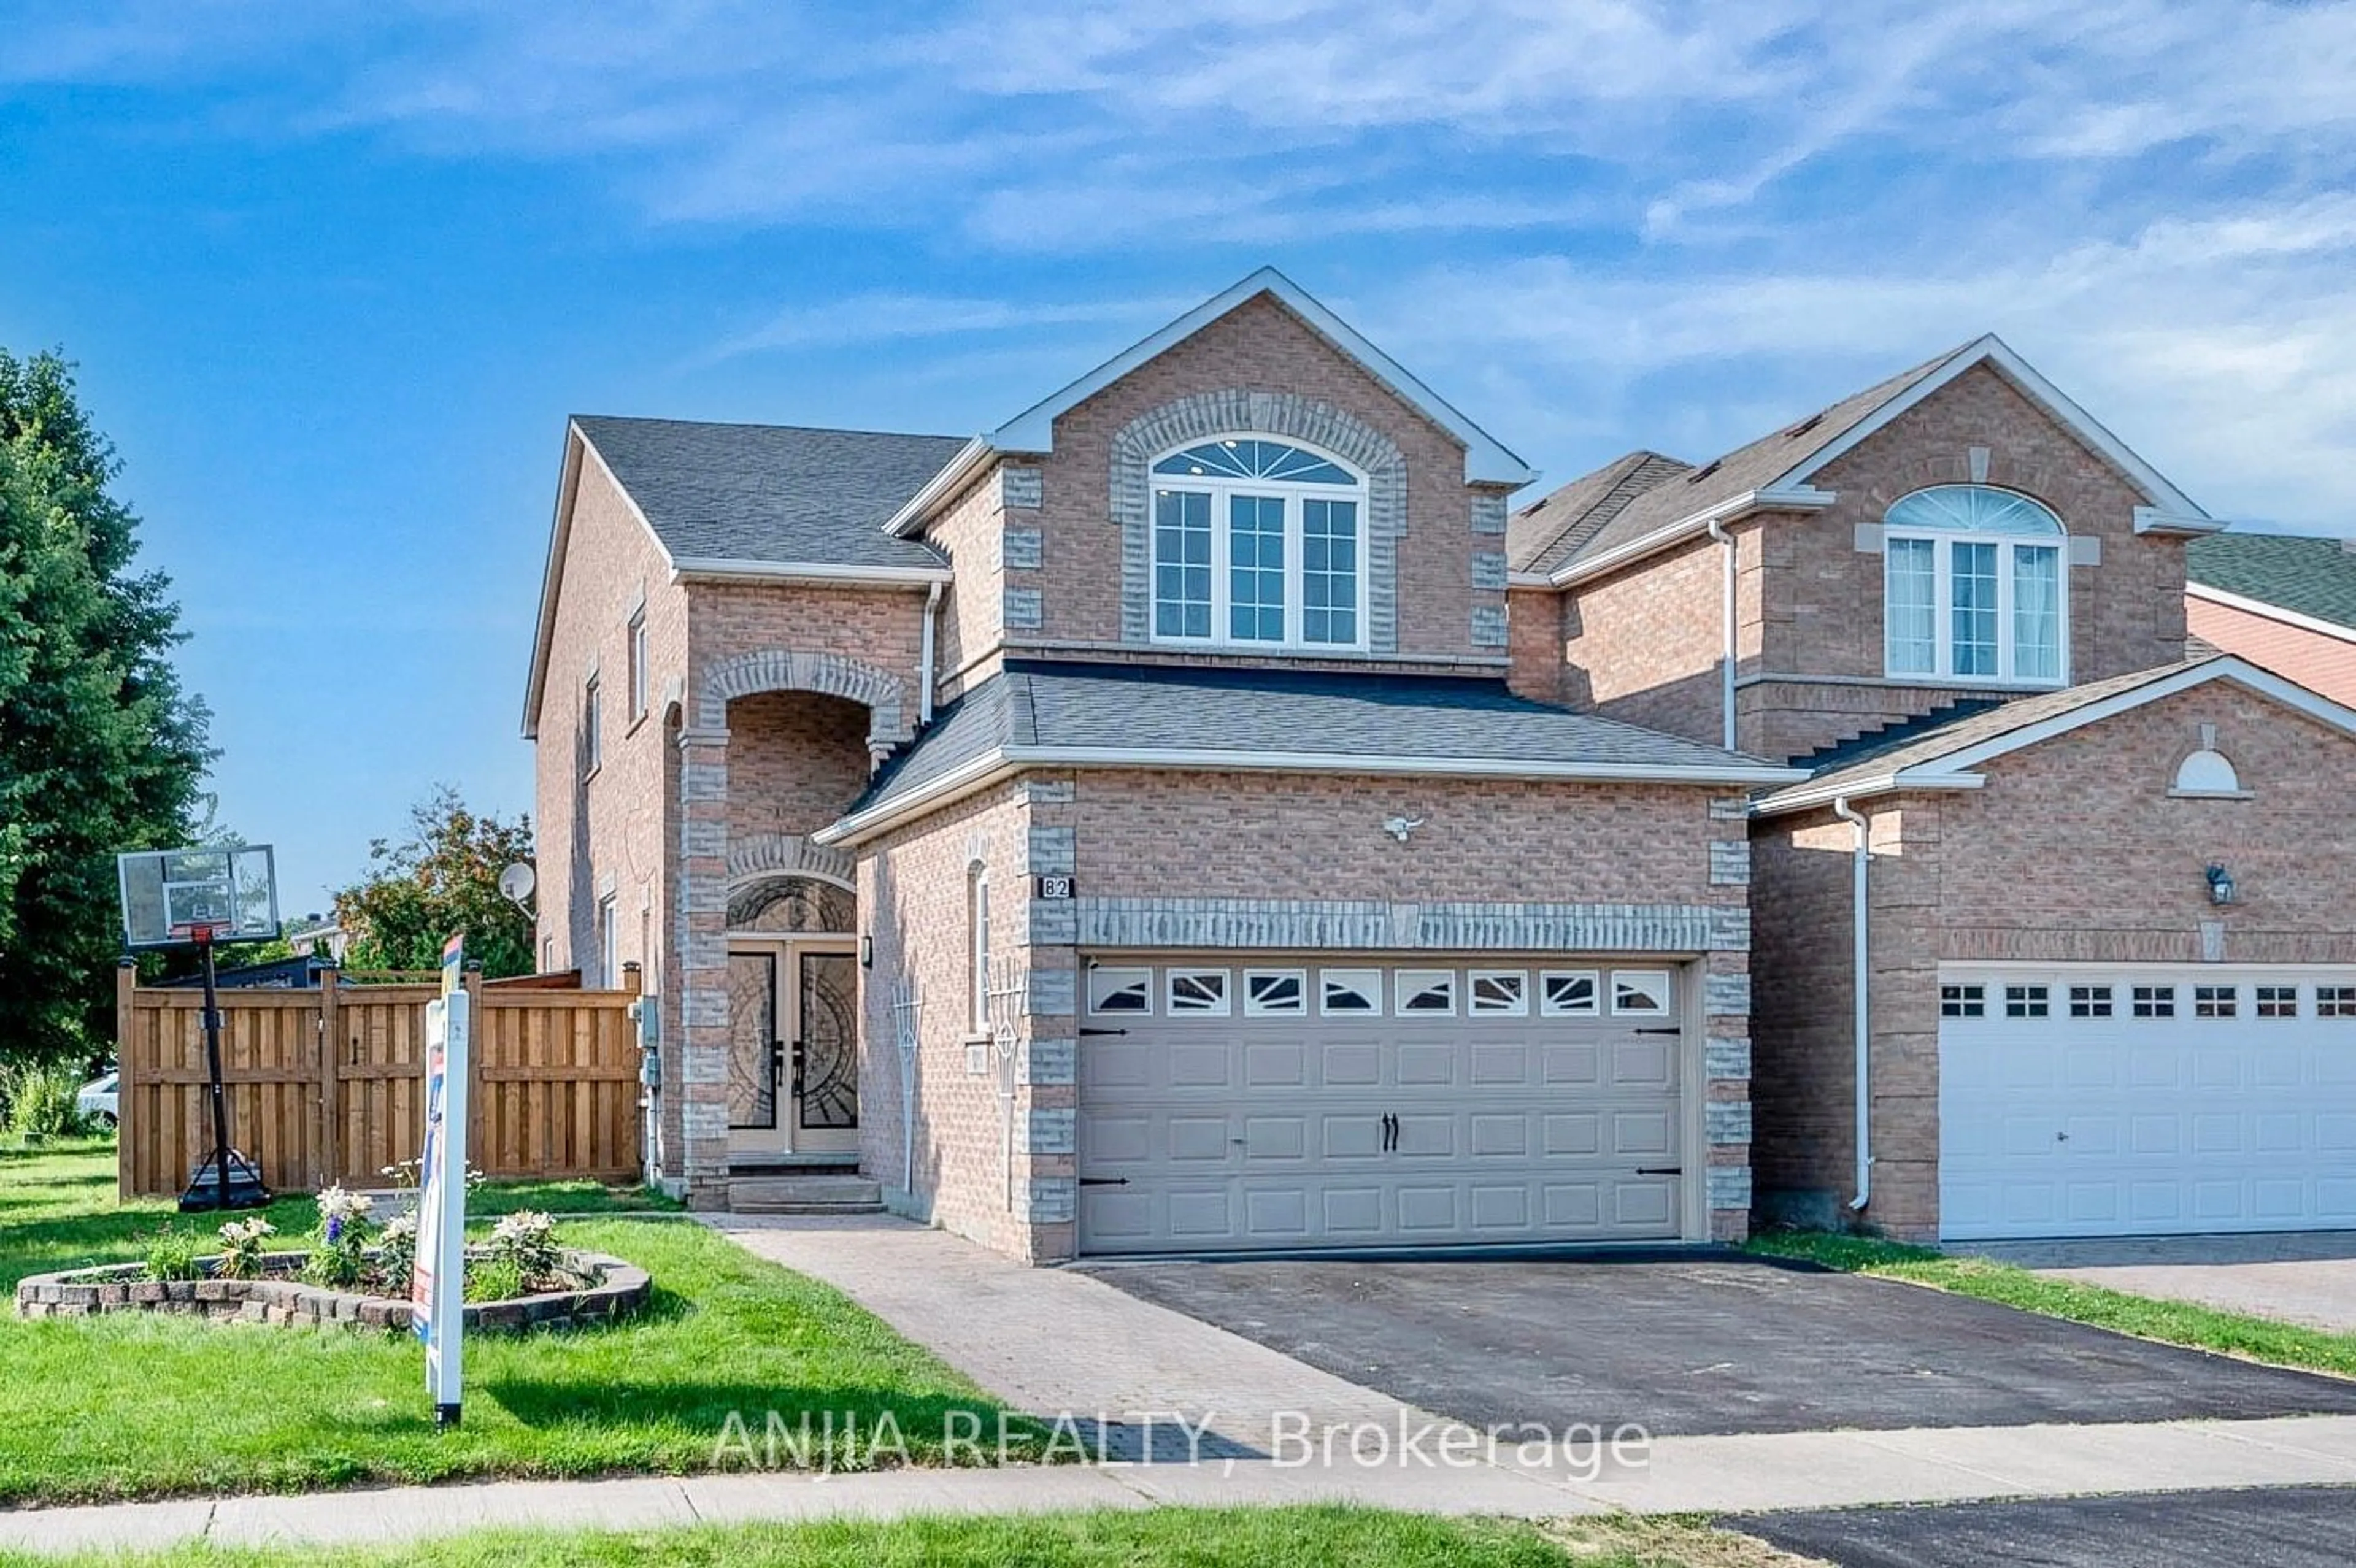 Home with brick exterior material for 82 Belford Cres, Markham Ontario L3S 4E1